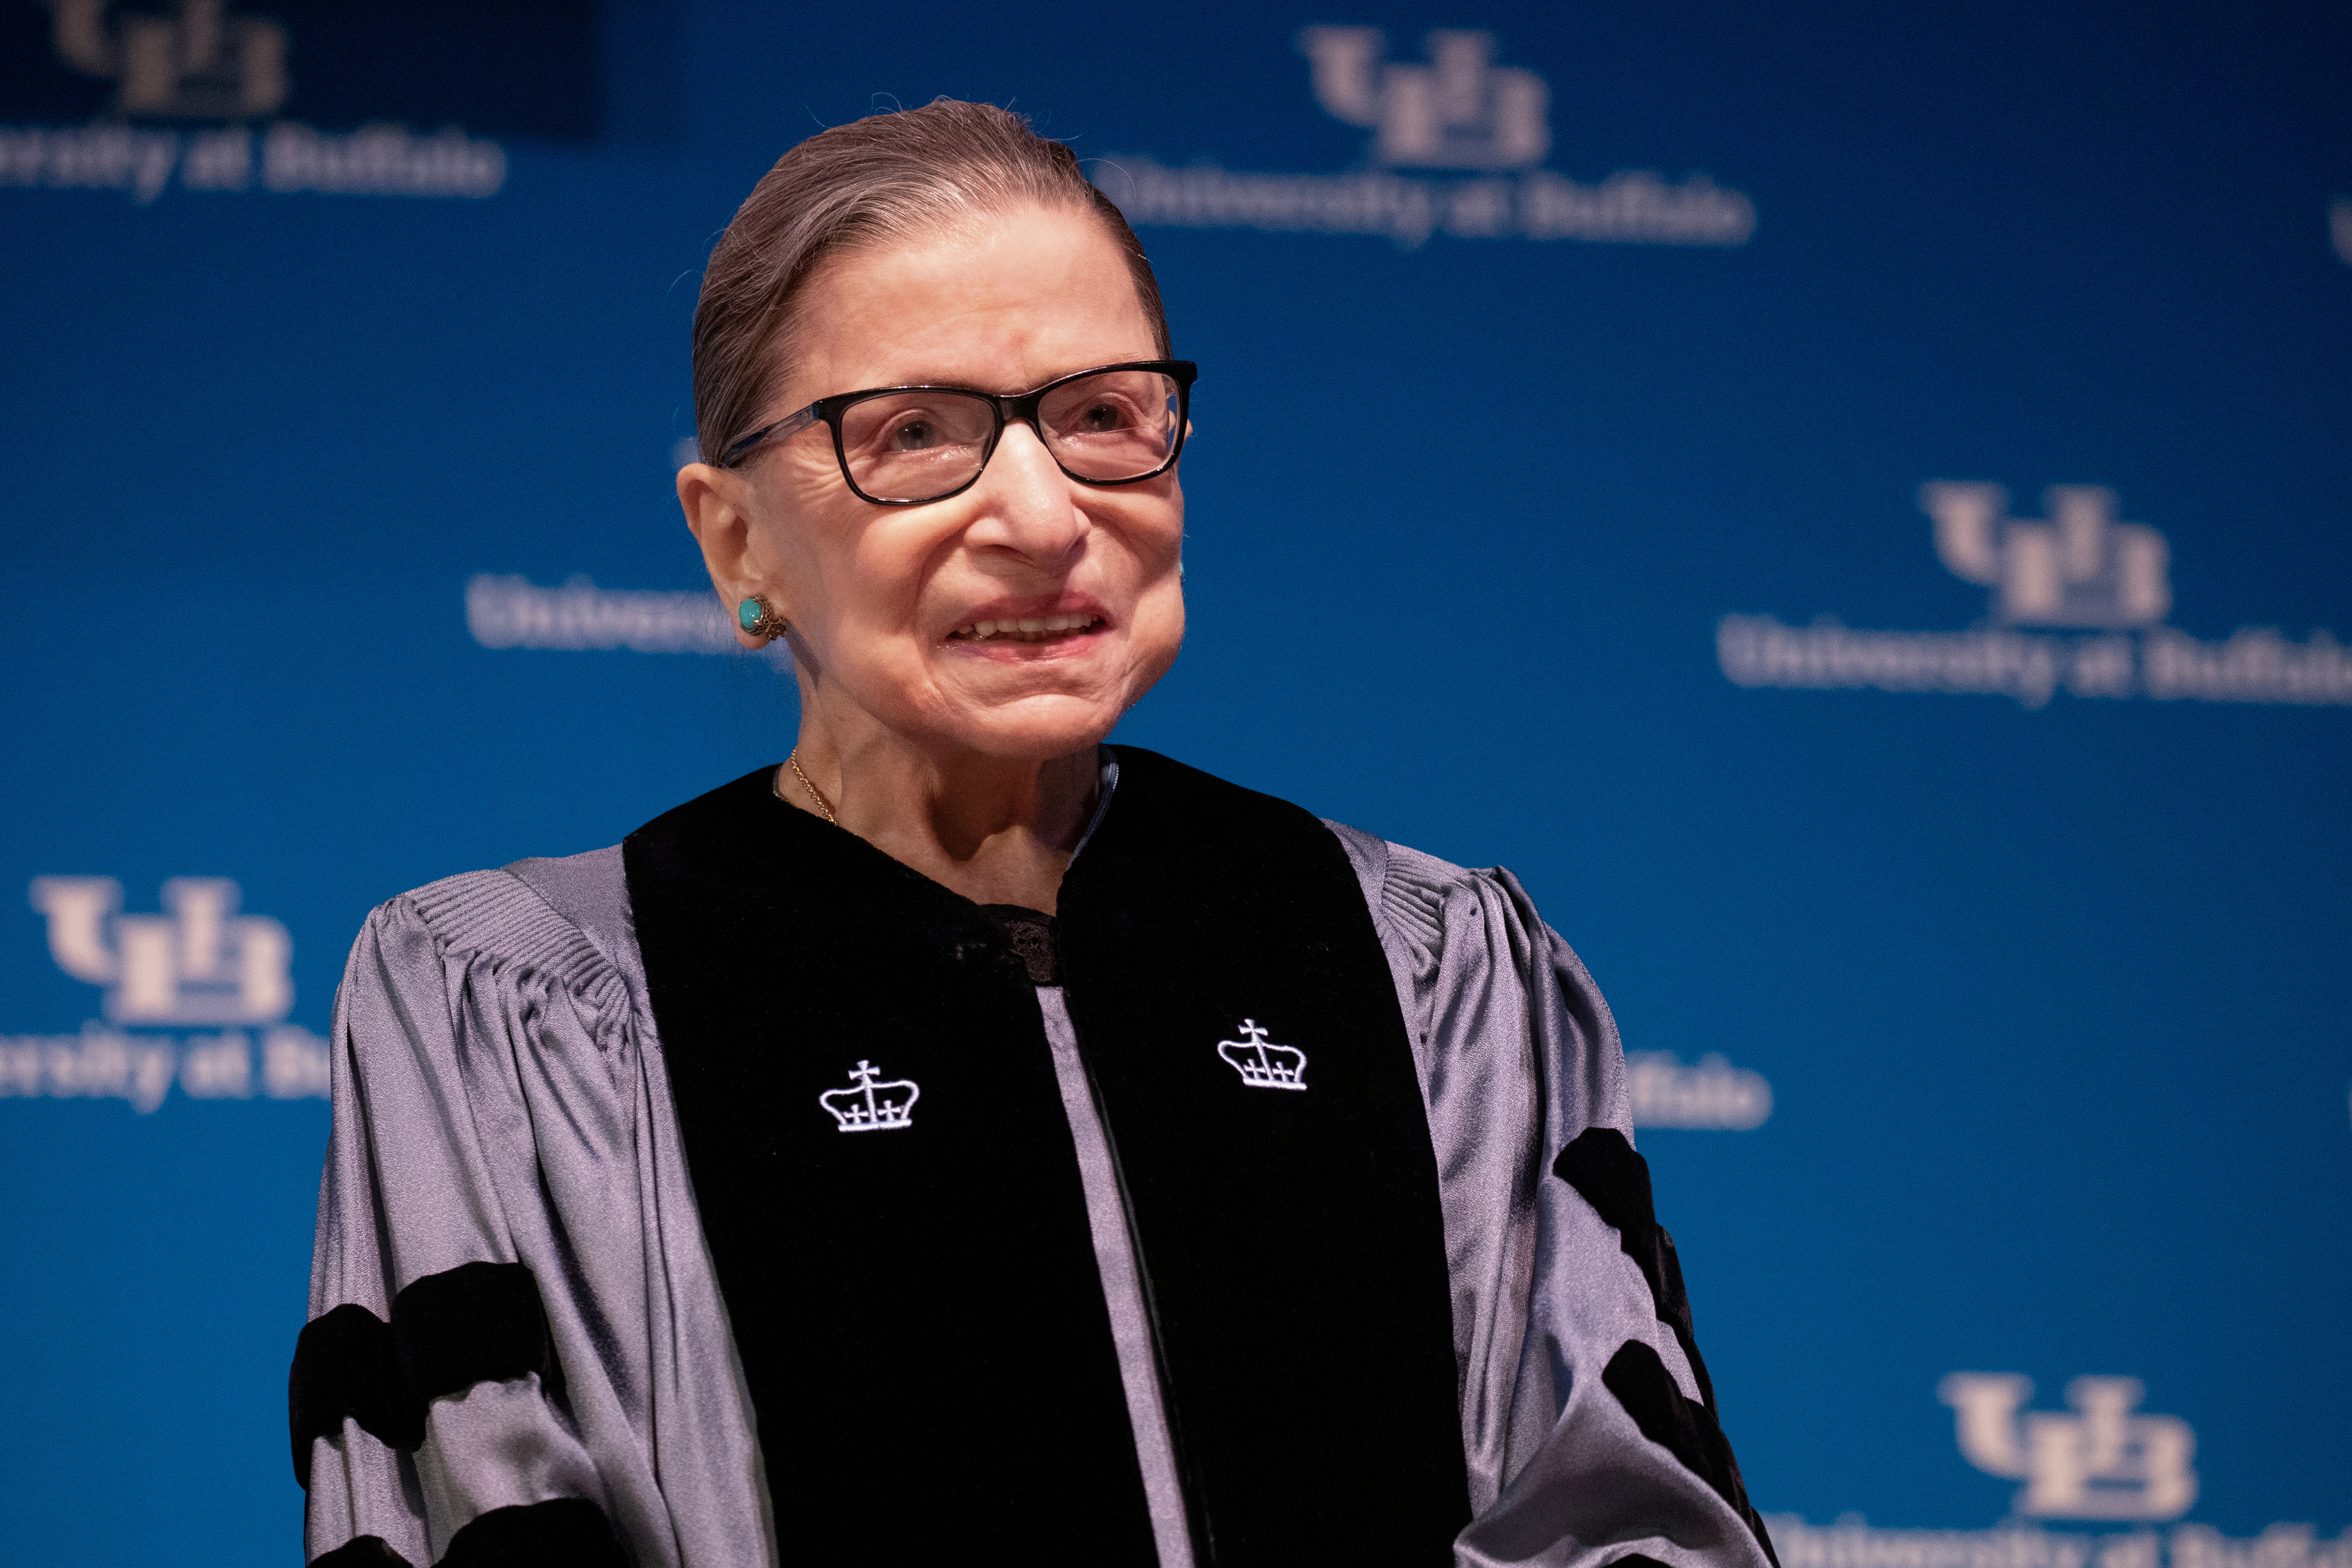 U.S. Supreme Court Justice Ruth Bader Ginsburg speaks at University of Buffalo School of Law in Buffalo, New York